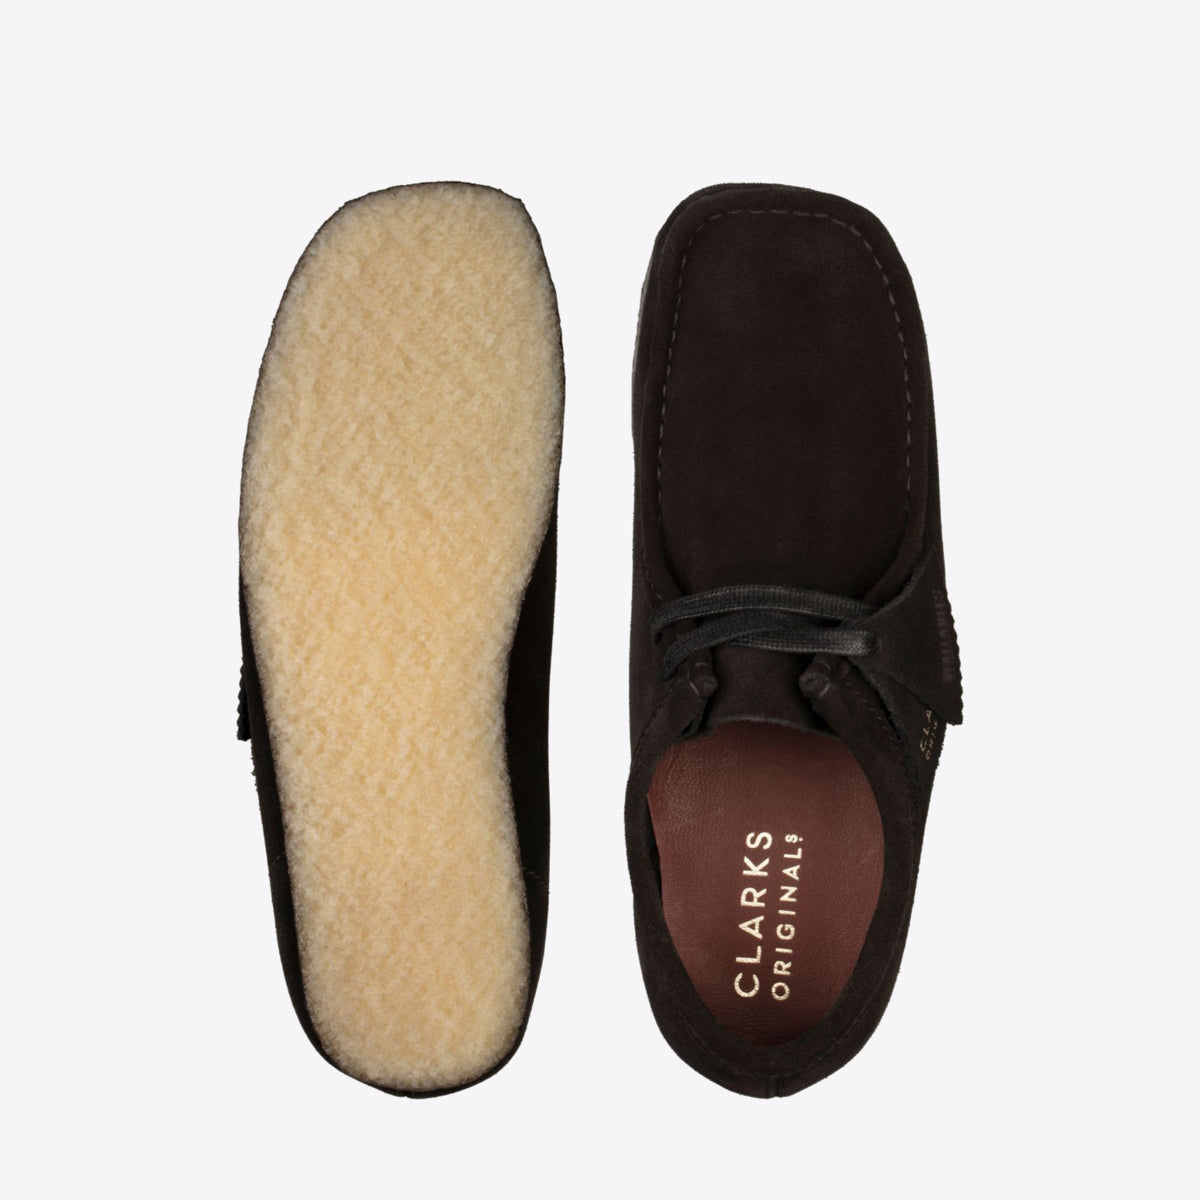 CLARKS Wallabee Boot Suede Black - Image 9